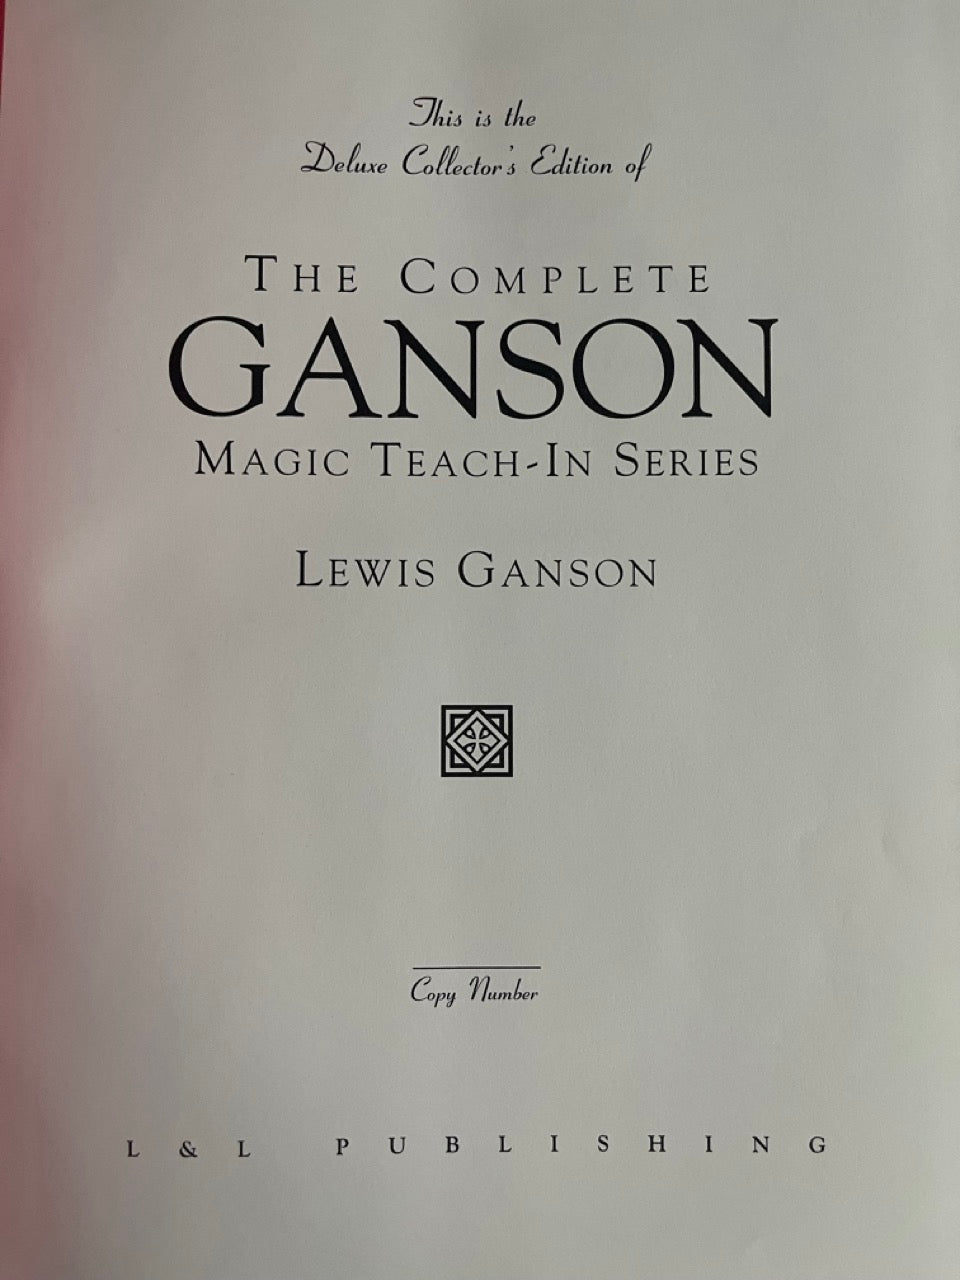 The Complete Ganson Teach-In Series - Lewis Ganson (Deluxe Collector's Edition)